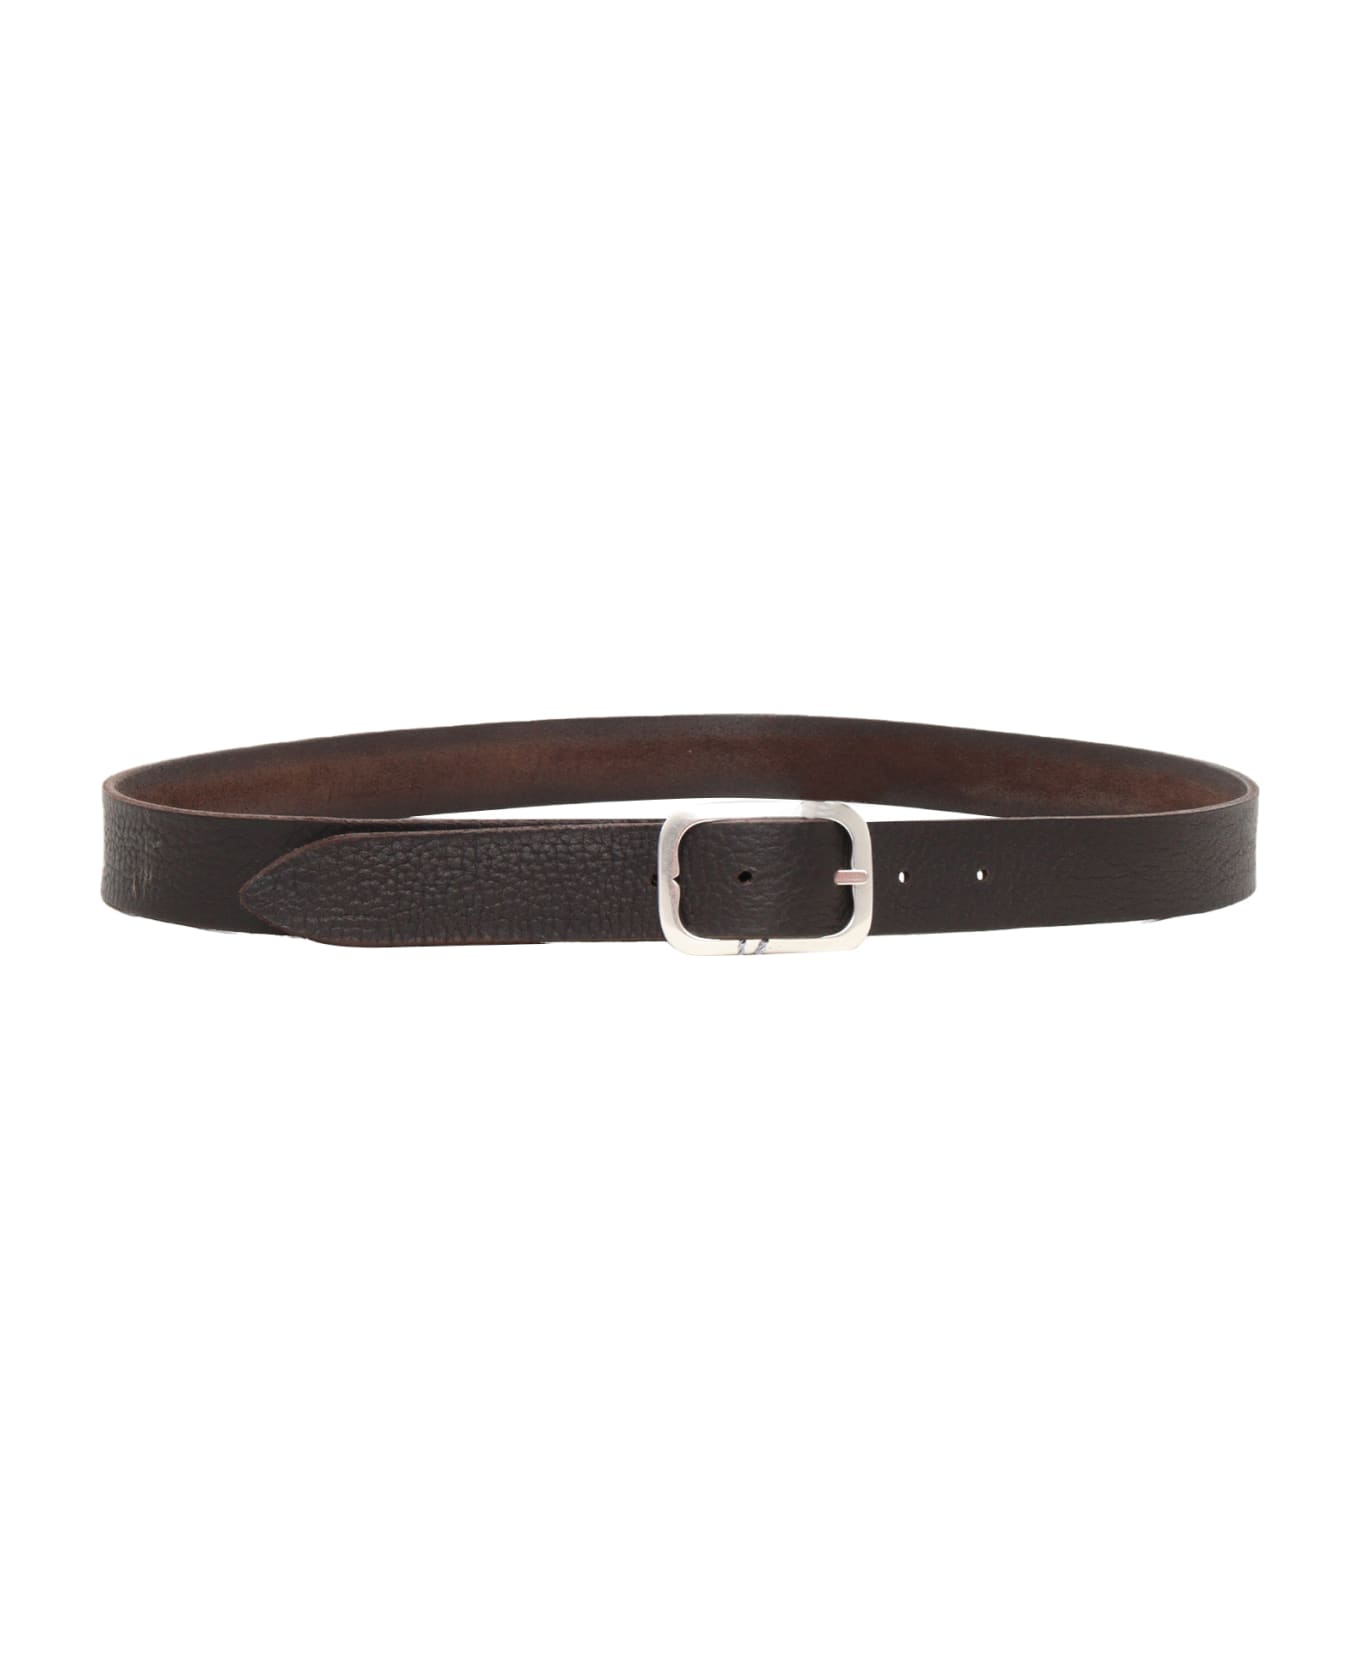 Orciani Brown Leather Belt - BROWN